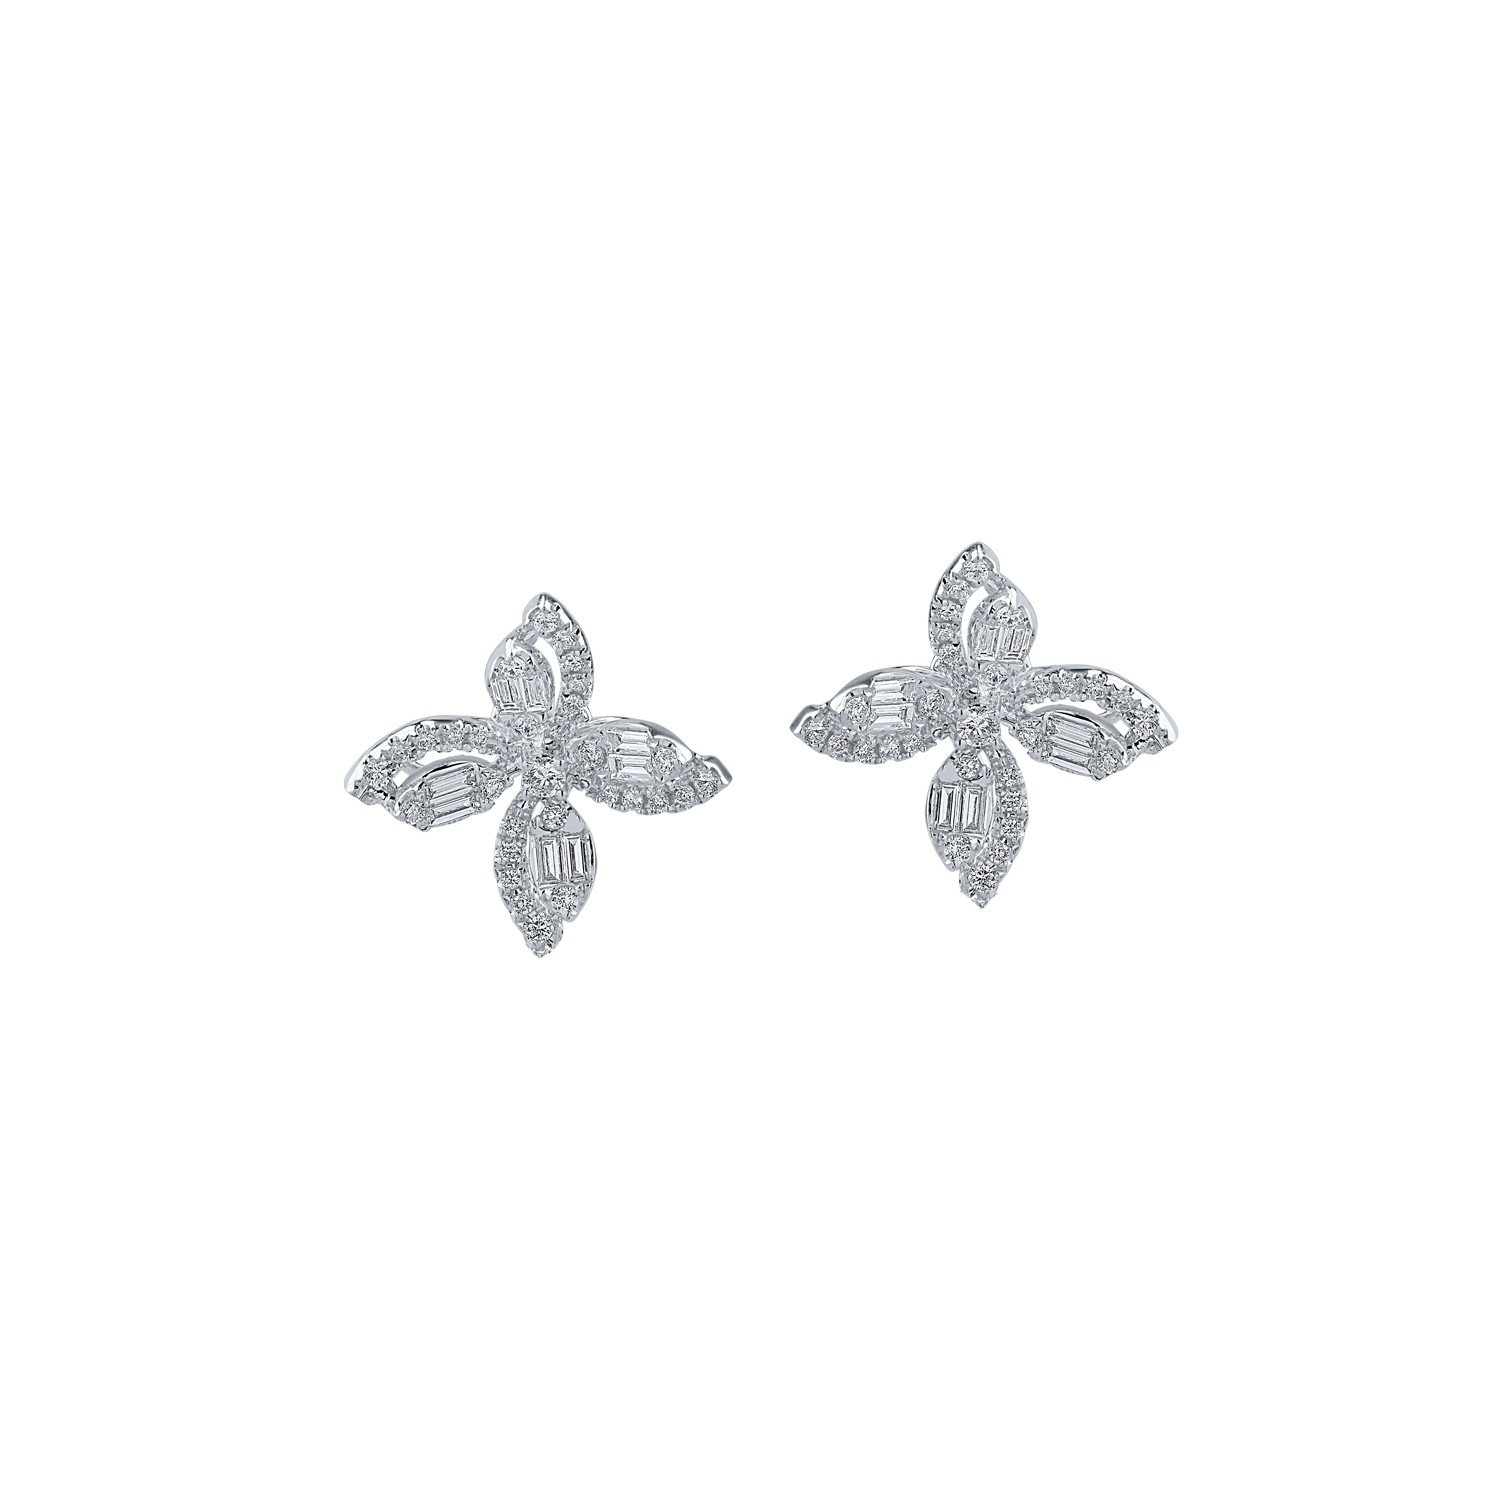 White gold flower earrings with 0.866ct diamonds